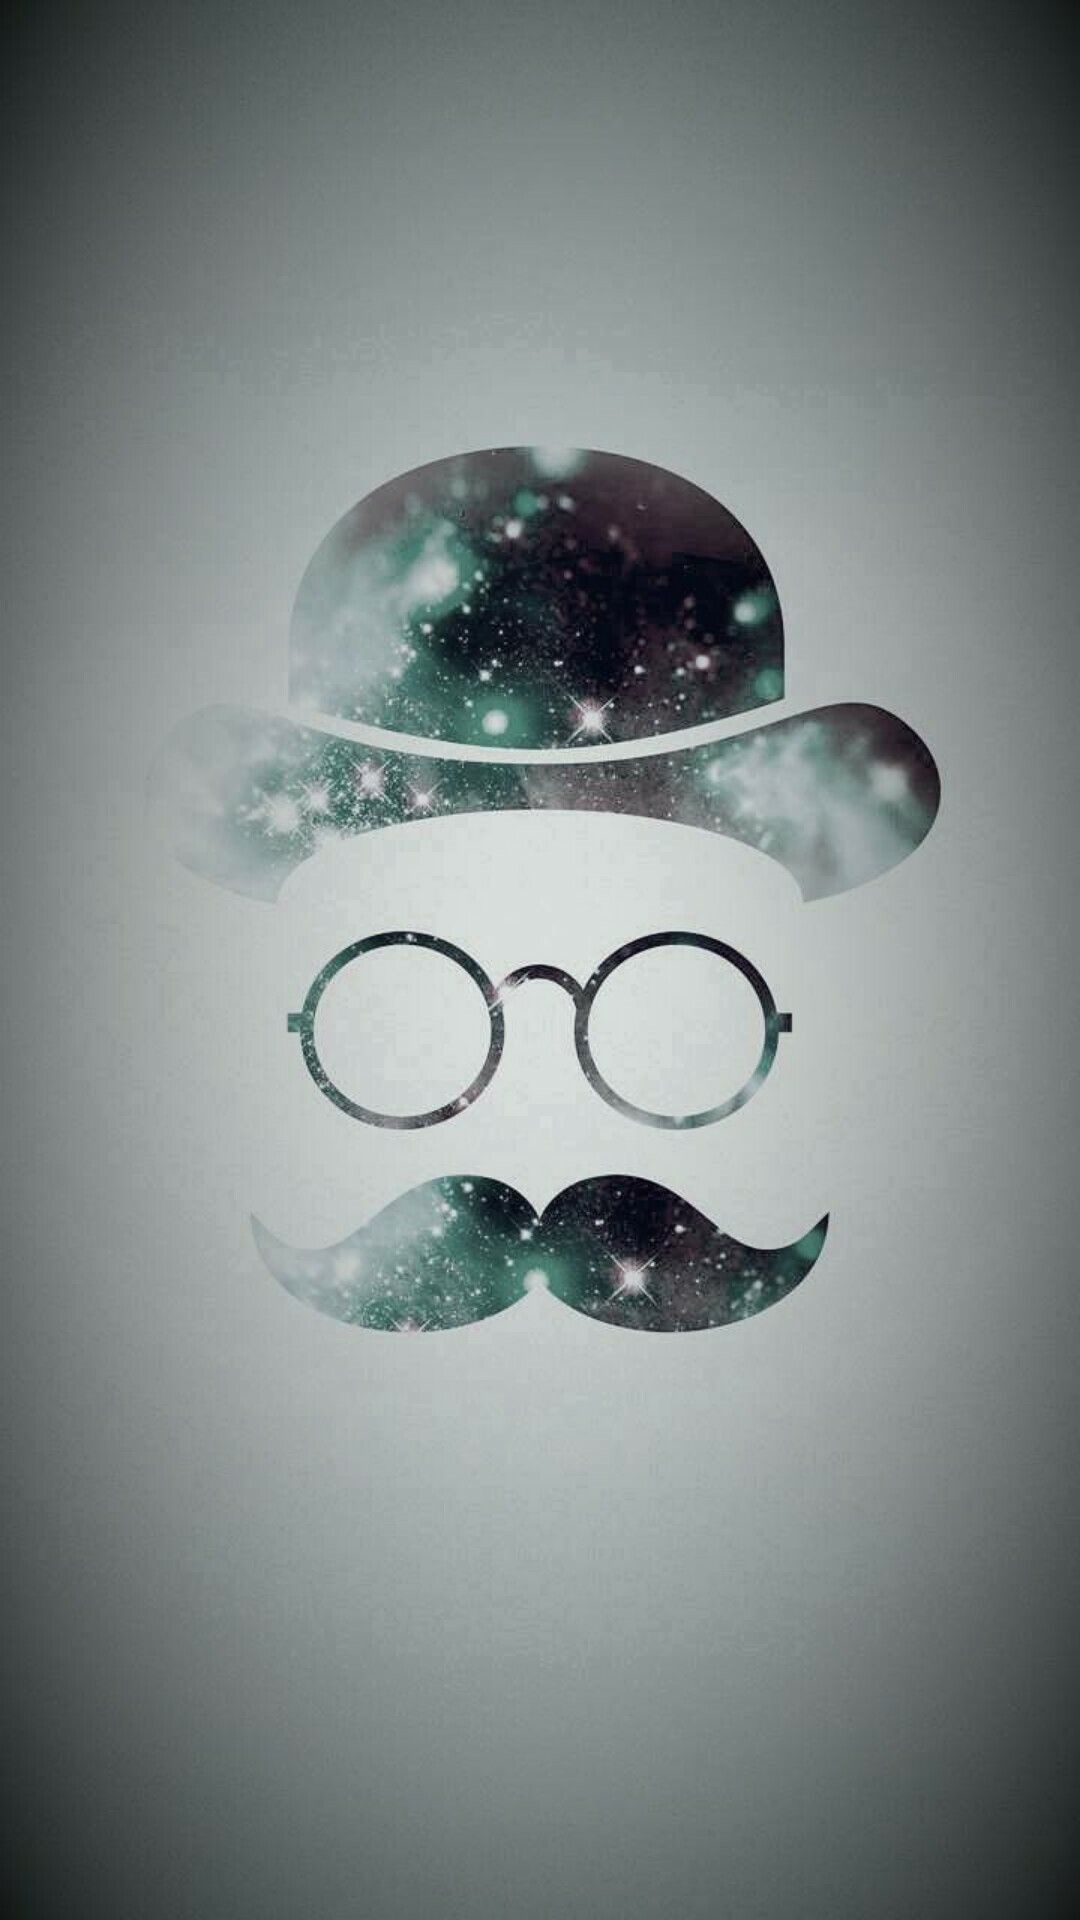 Hipster phone backgrounds, Fashionable mustache designs, Pinterest inspiration, Trendy aesthetics, 1080x1920 Full HD Phone